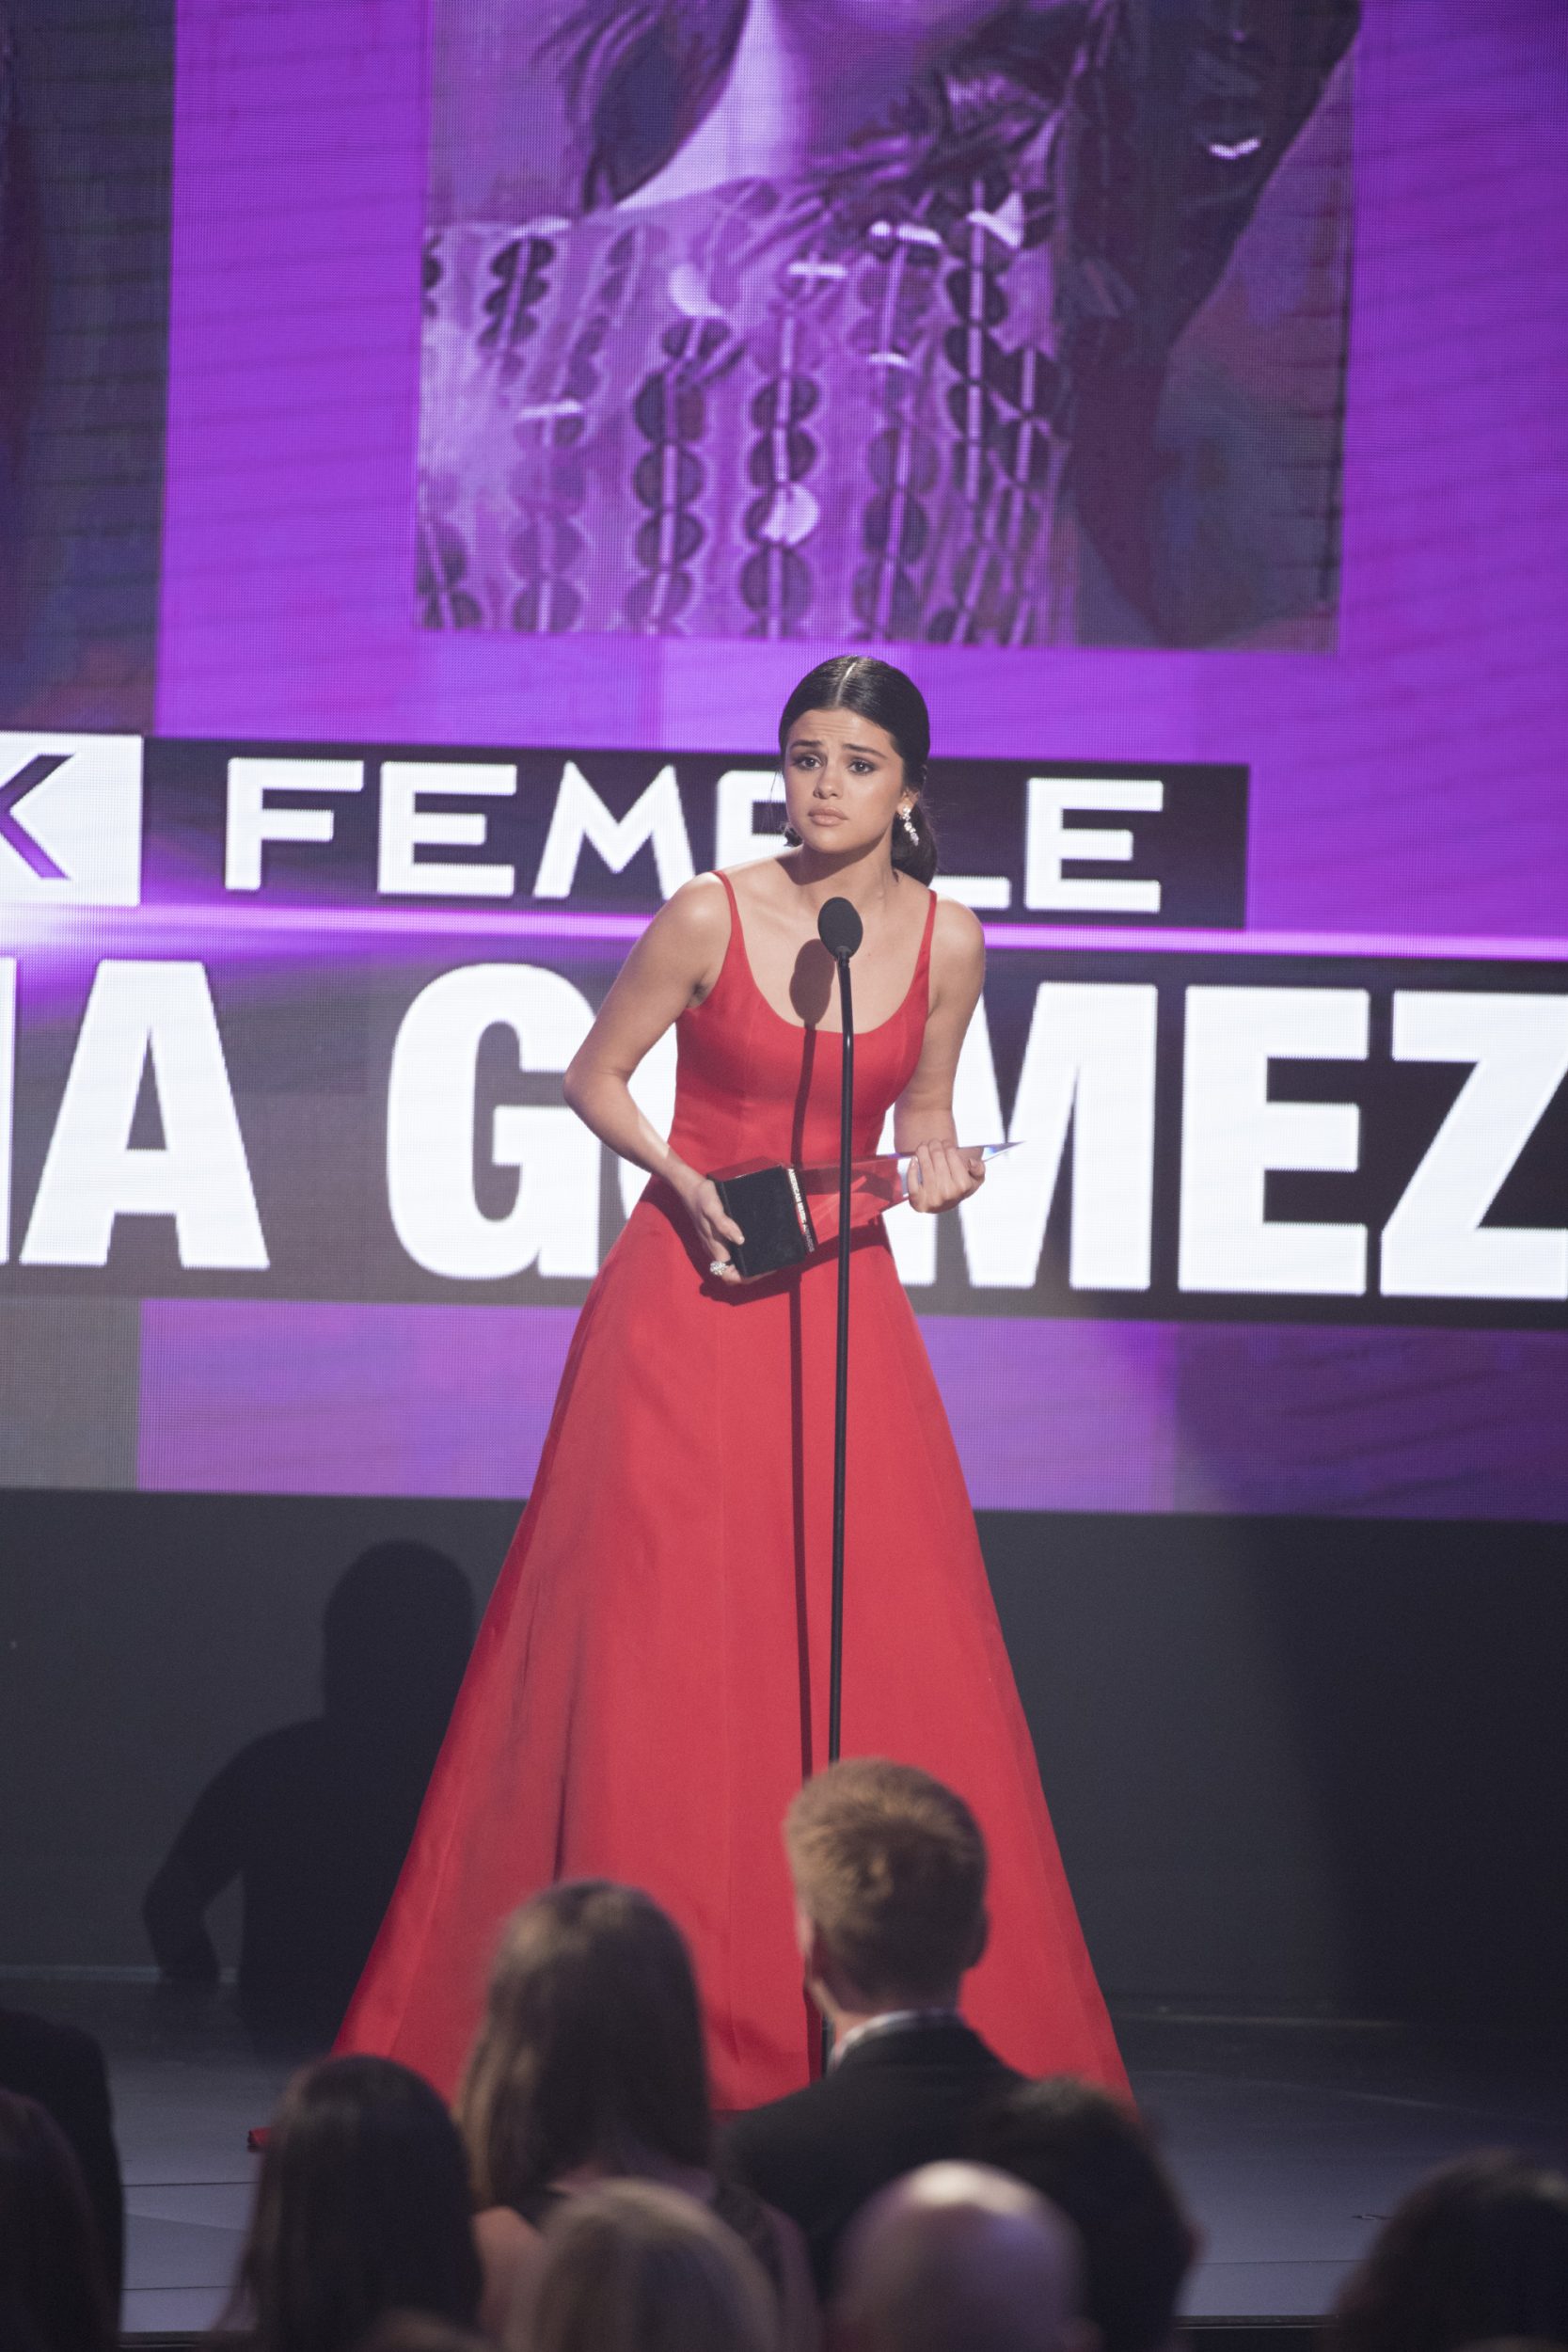 THE 2016 AMERICAN MUSIC AWARDS(r) - The “2016 American Music Awards,” the world’s biggest fan-voted award show, broadcasts live from the Microsoft Theater in Los Angeles on SUNDAY, NOVEMBER 20, at 8:00 p.m. EST, on ABC. (Image Group LA/ABC) SELENA GOMEZ